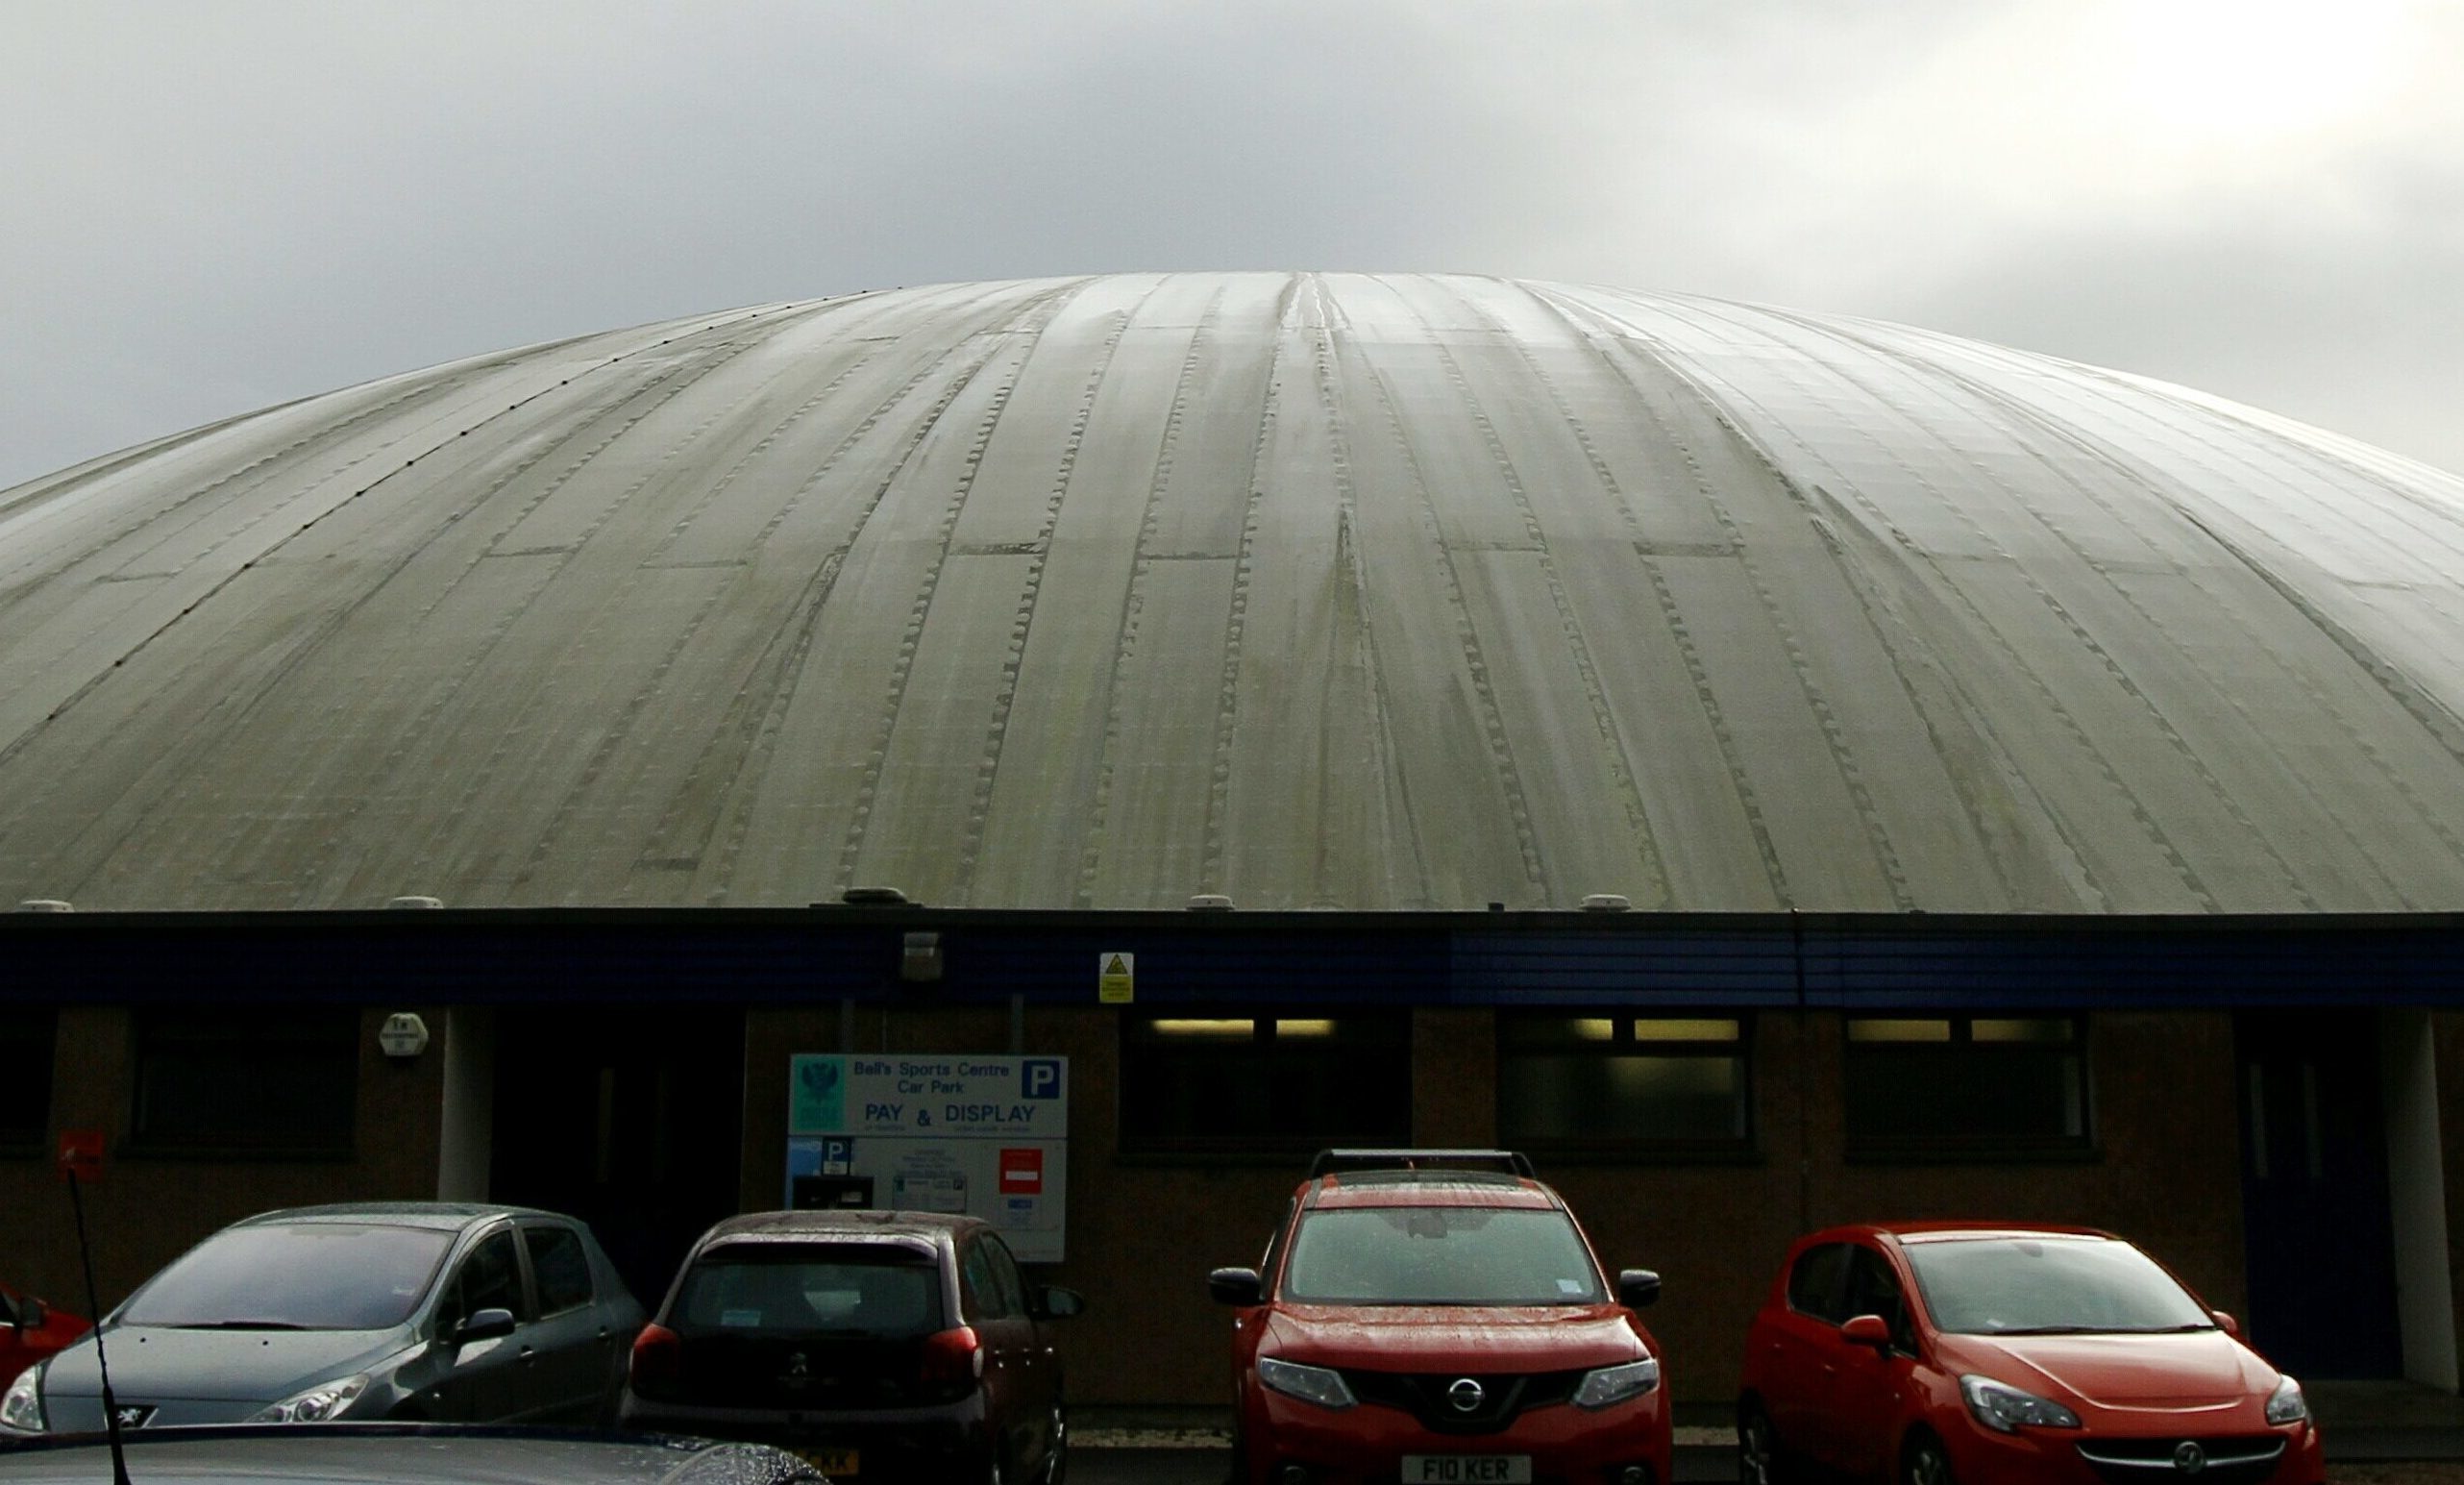 The dome of the Bell's Sports Centre in Perth.